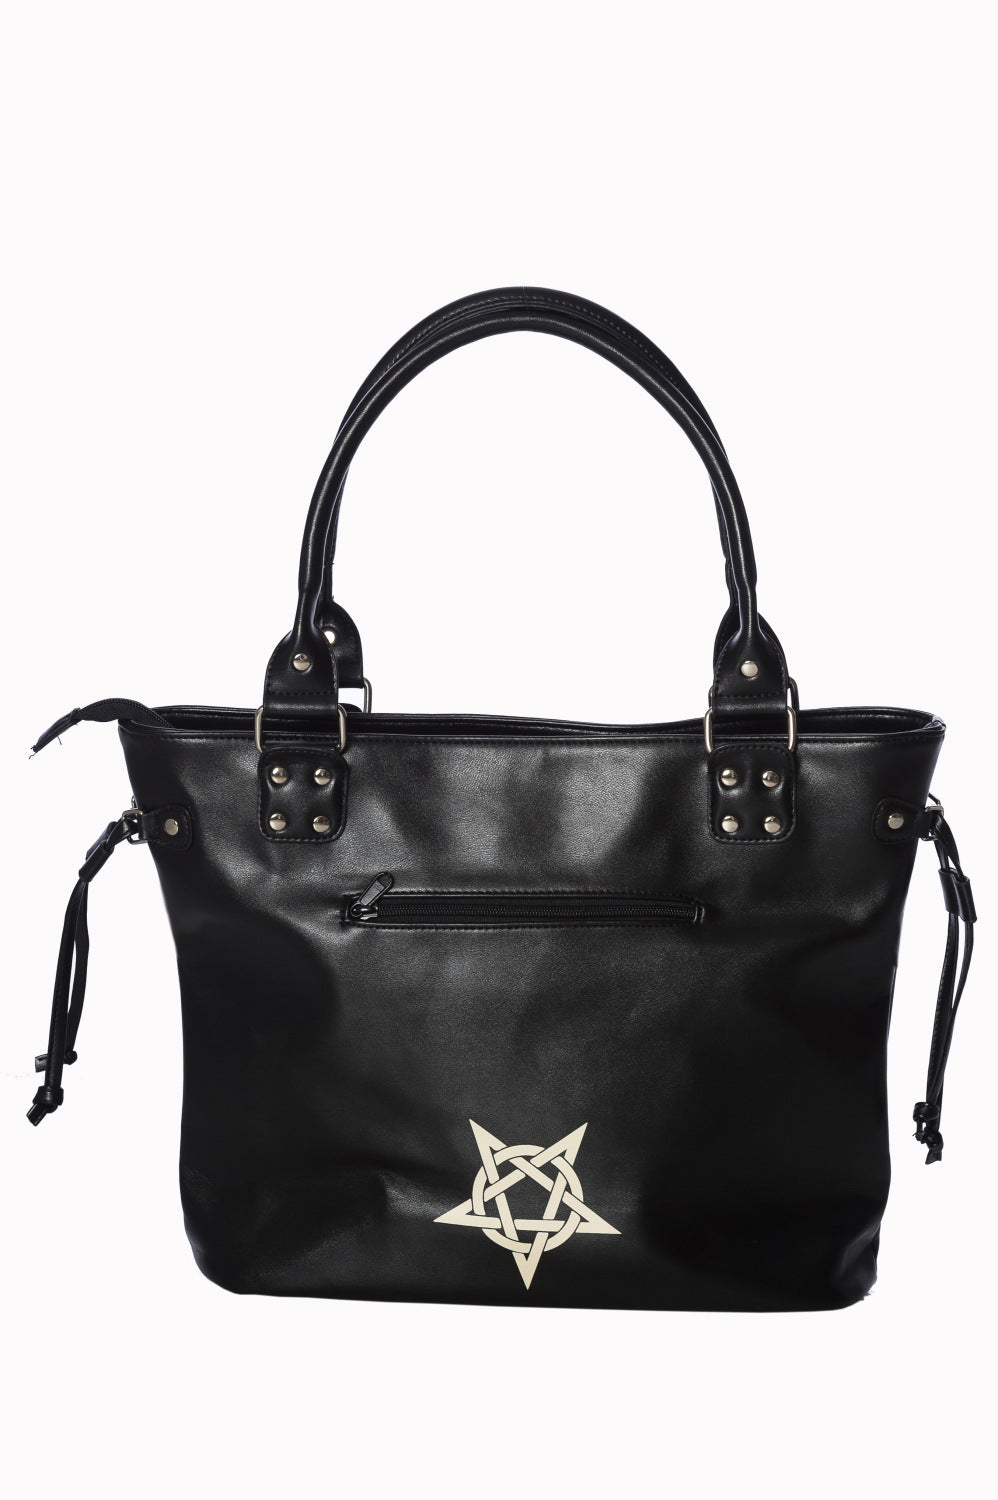 ESOTERIC CAT BAG Alternative by Banned Apparel – Banned Alternative Europe